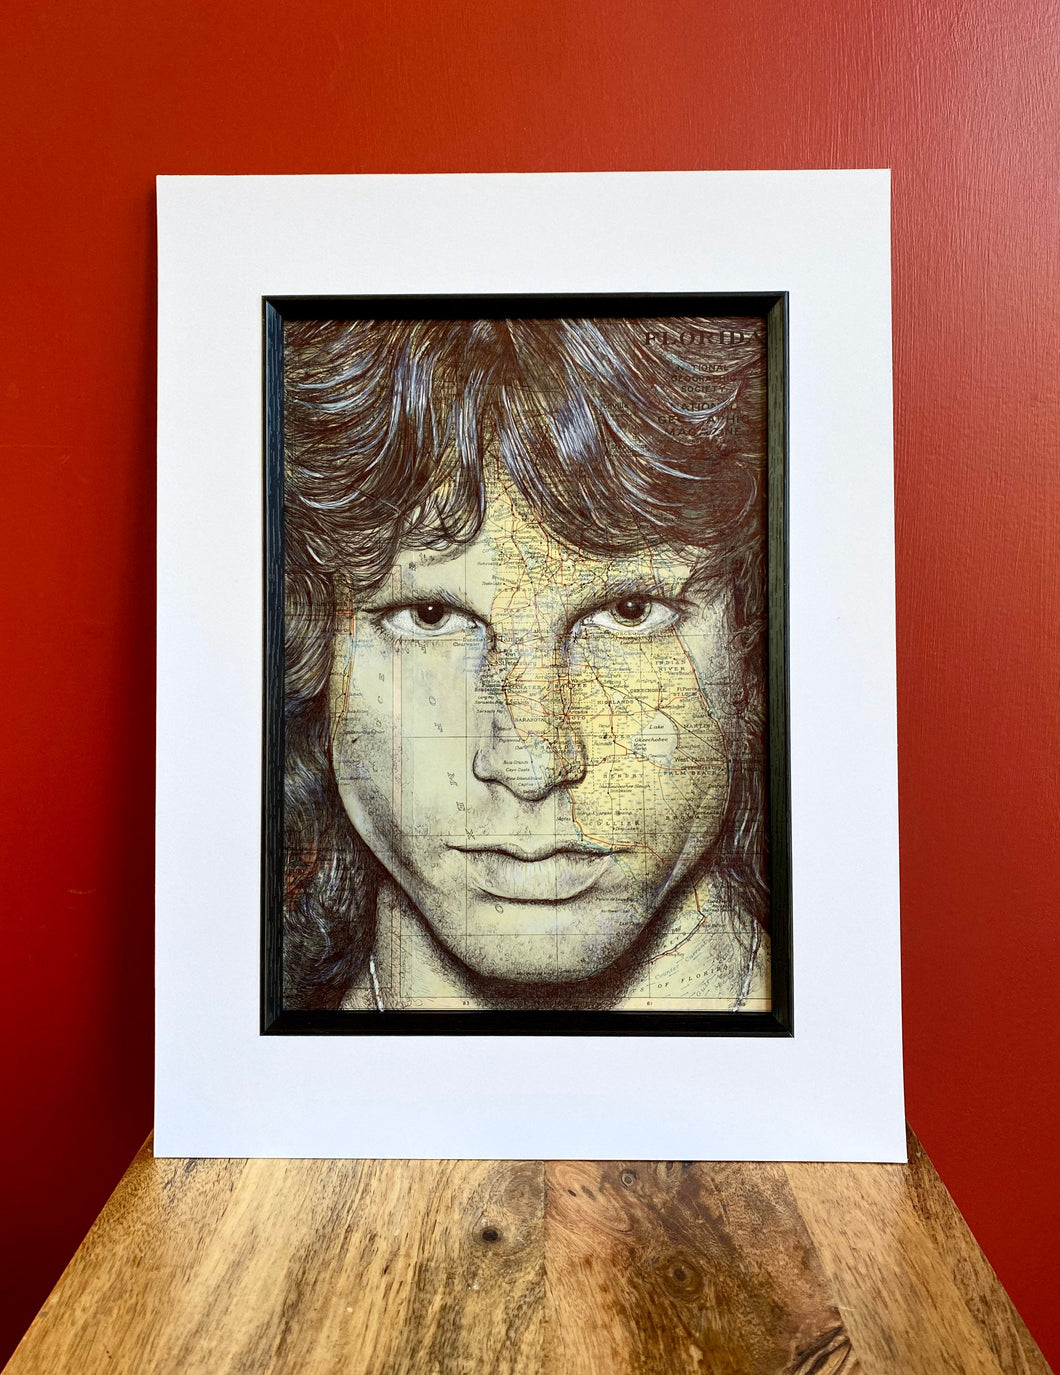 Jim Morrison Art Print. Pen drawing over a map of Los Angeles. A4 Unframed